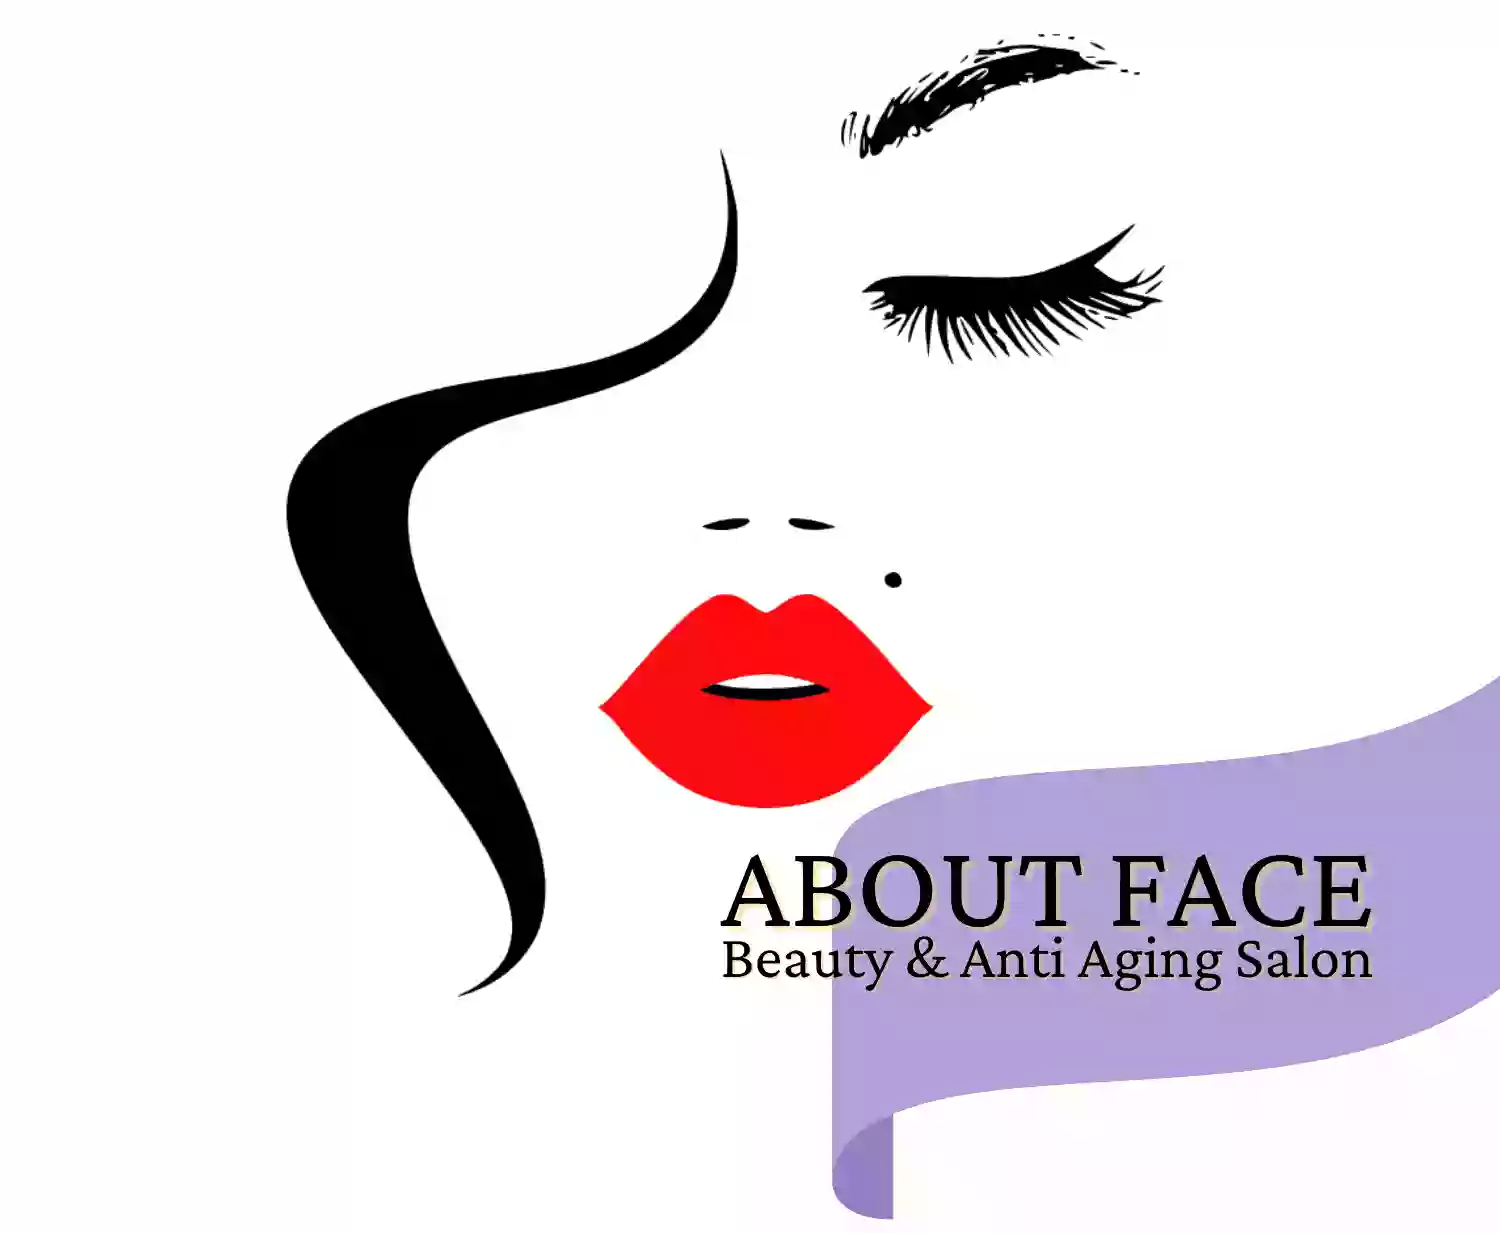 ABOUT FACE Beauty & Anti Aging Salon